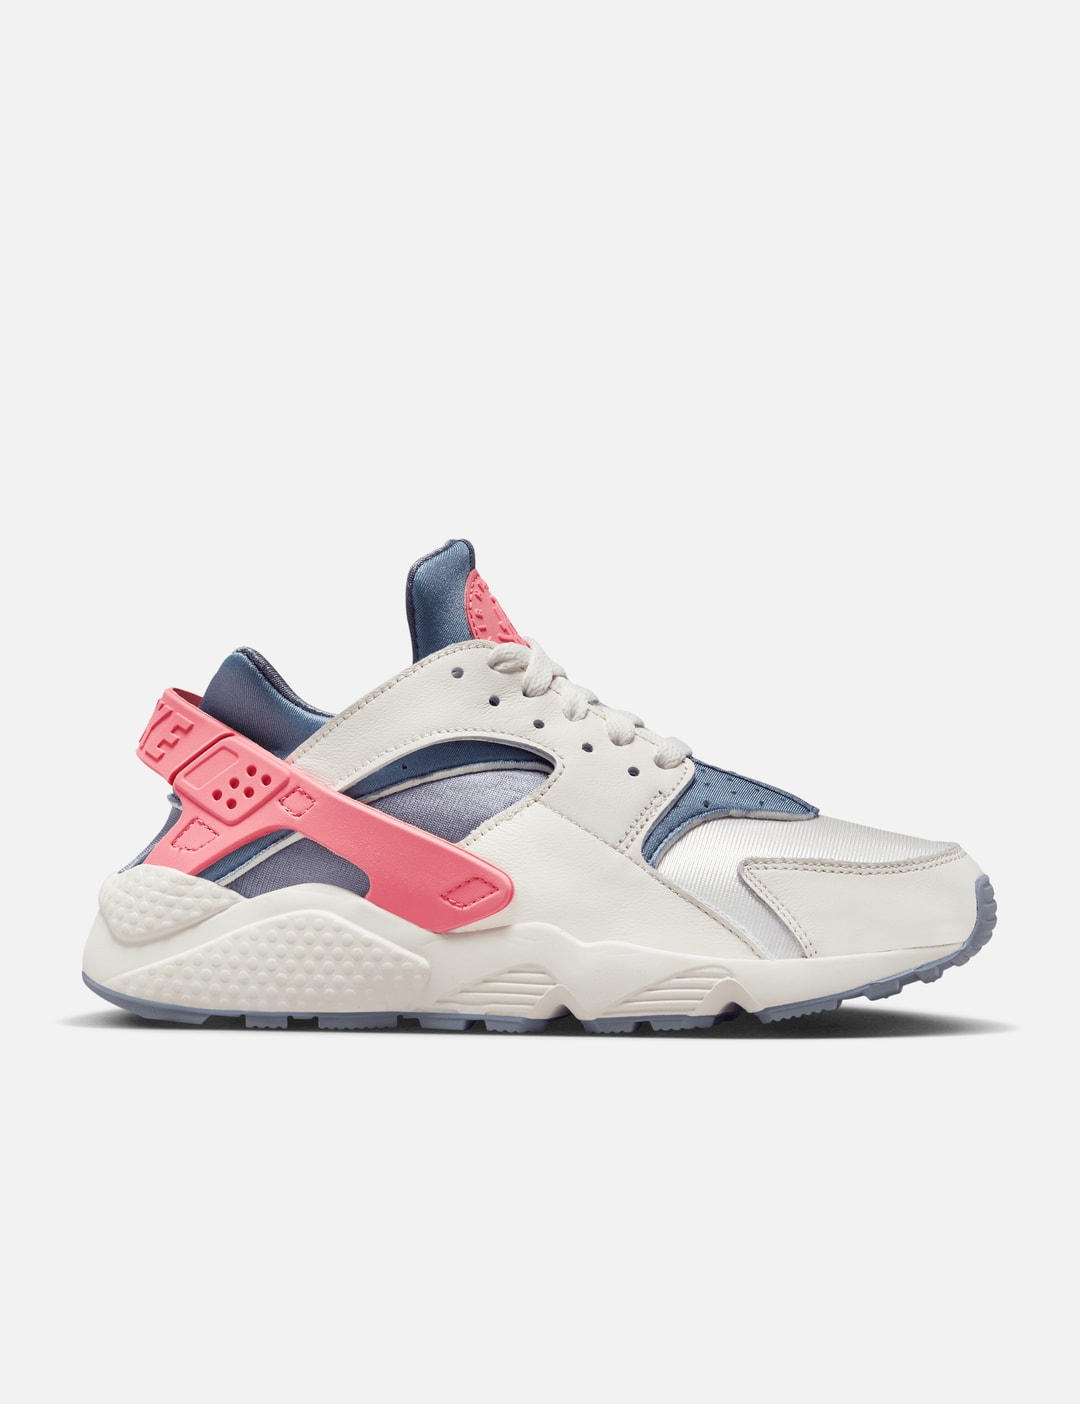 Afståelse sten skraber Nike - NIKE AIR HUARACHE | HBX - Globally Curated Fashion and Lifestyle by  Hypebeast